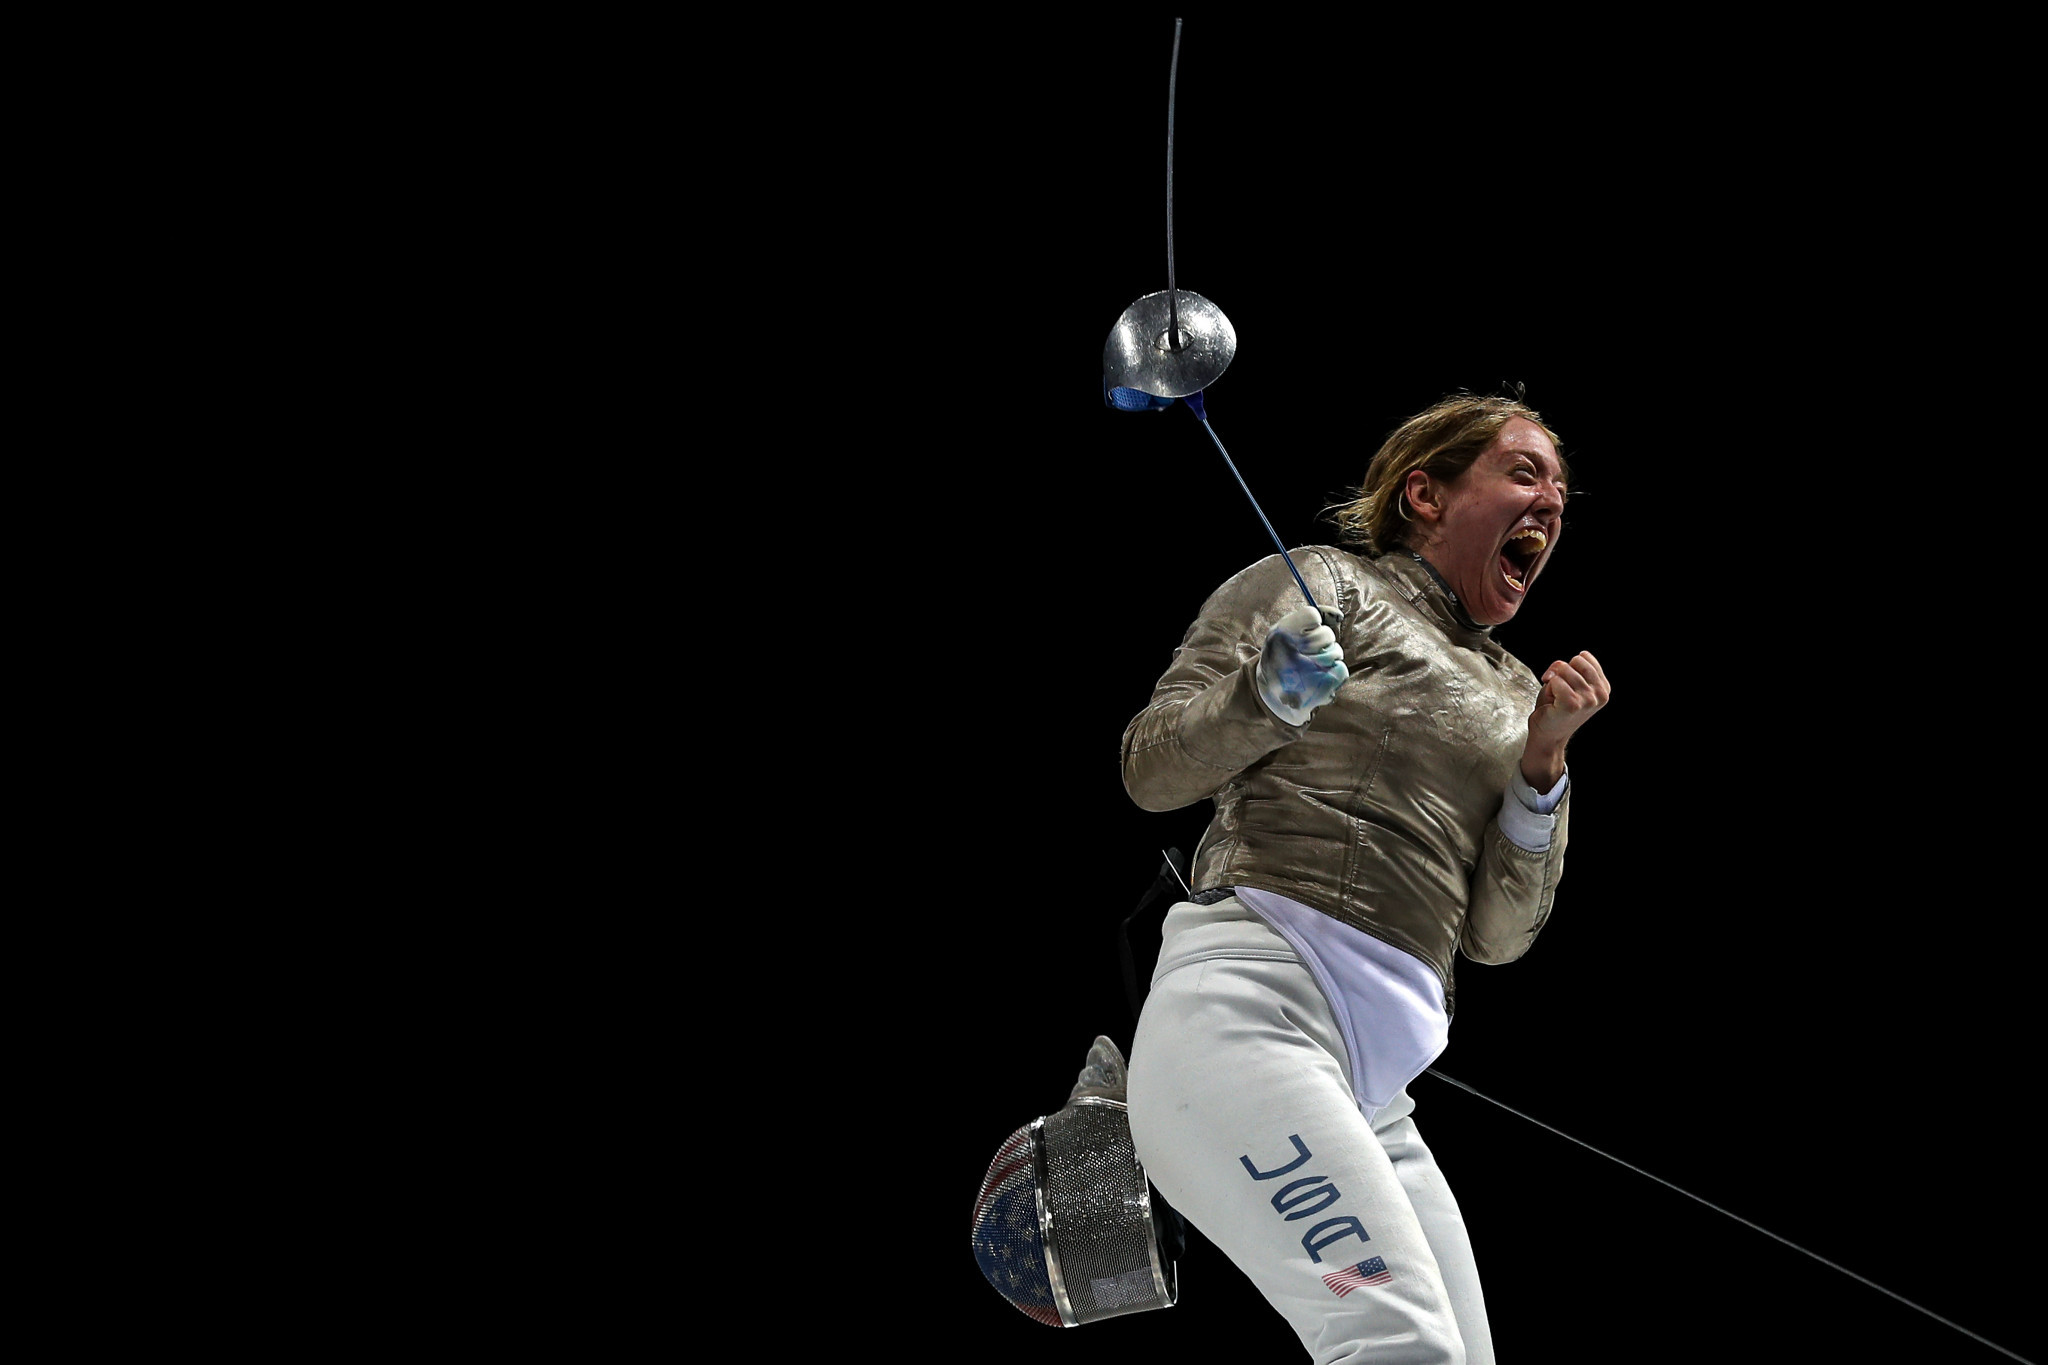 United States' Anne-Elizabeth Stone won the women's sabre event ©Getty Images